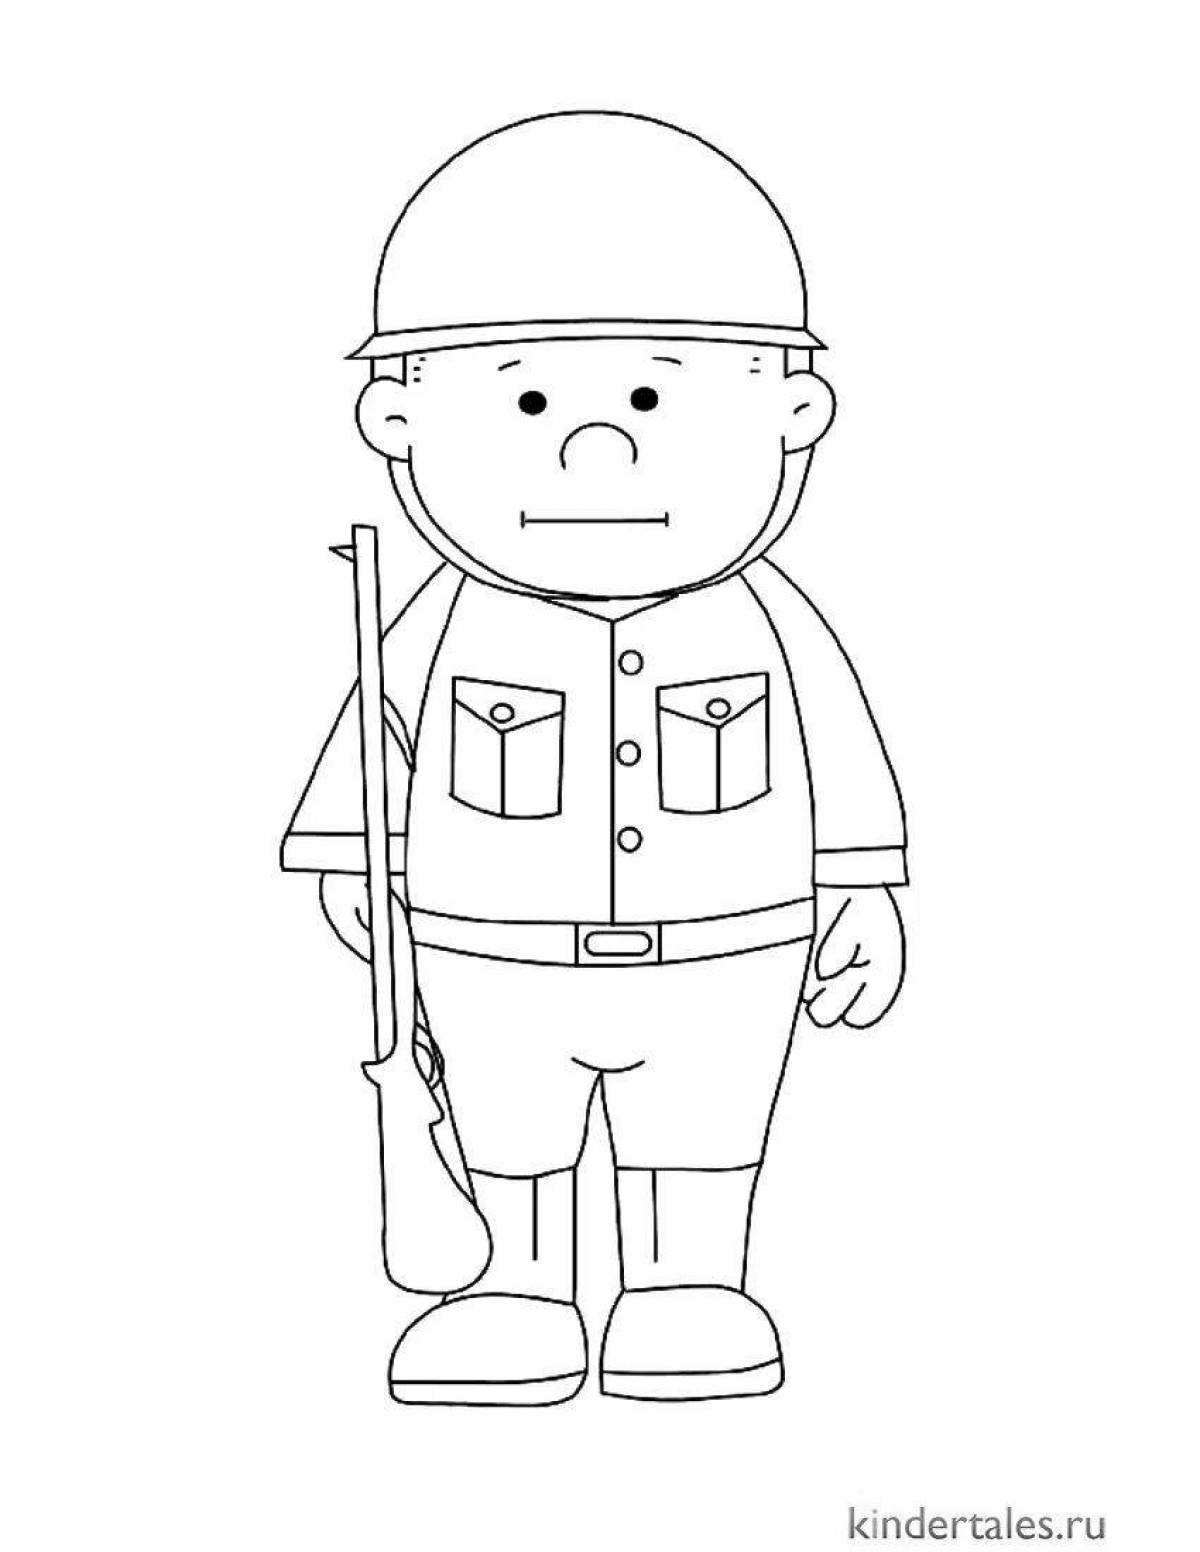 Colourful toy soldiers coloring book